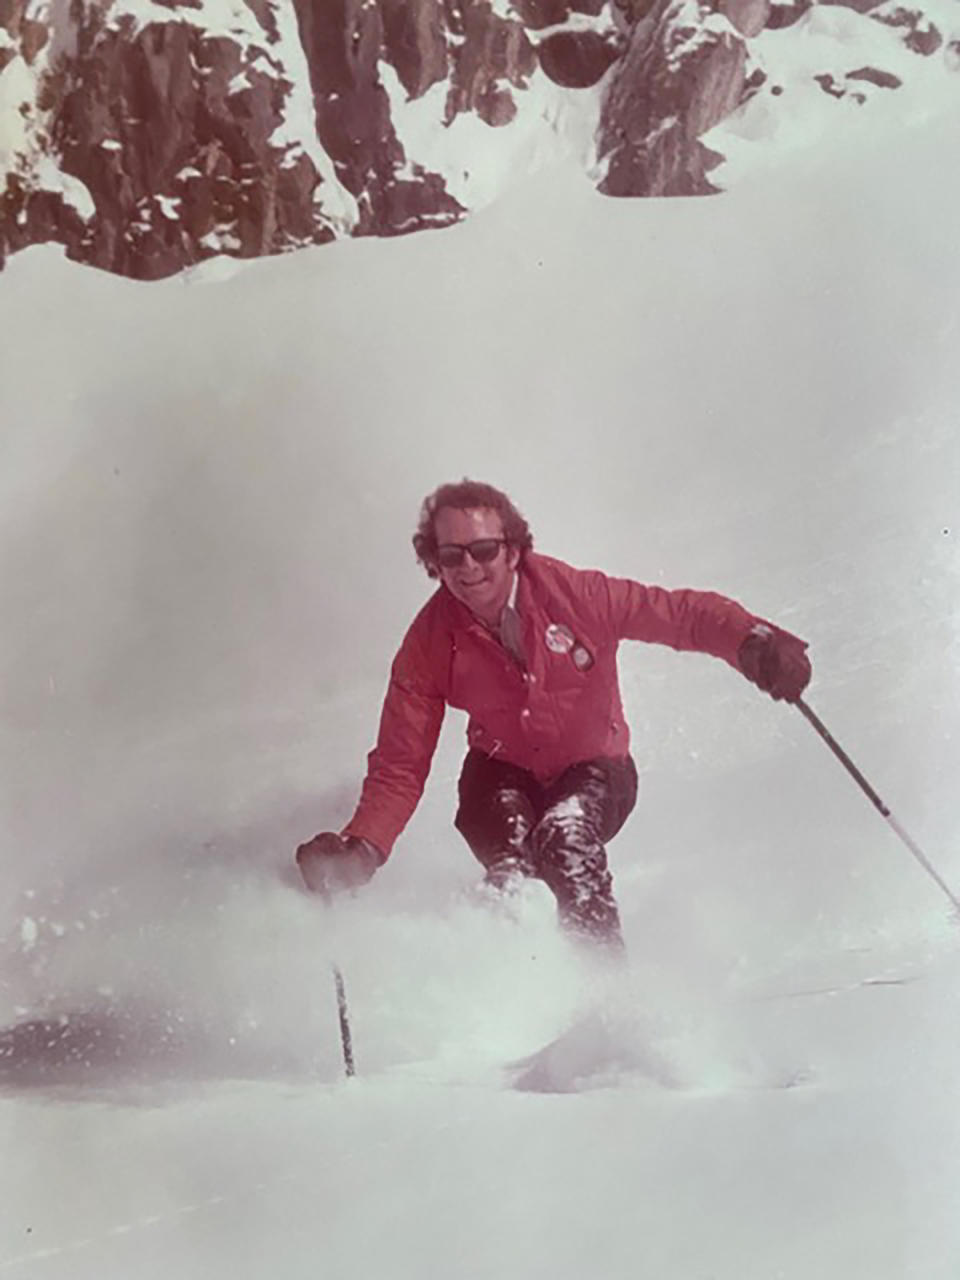 Gow skiing in the 70s<span class="copyright">Courtesy John Gow</span>